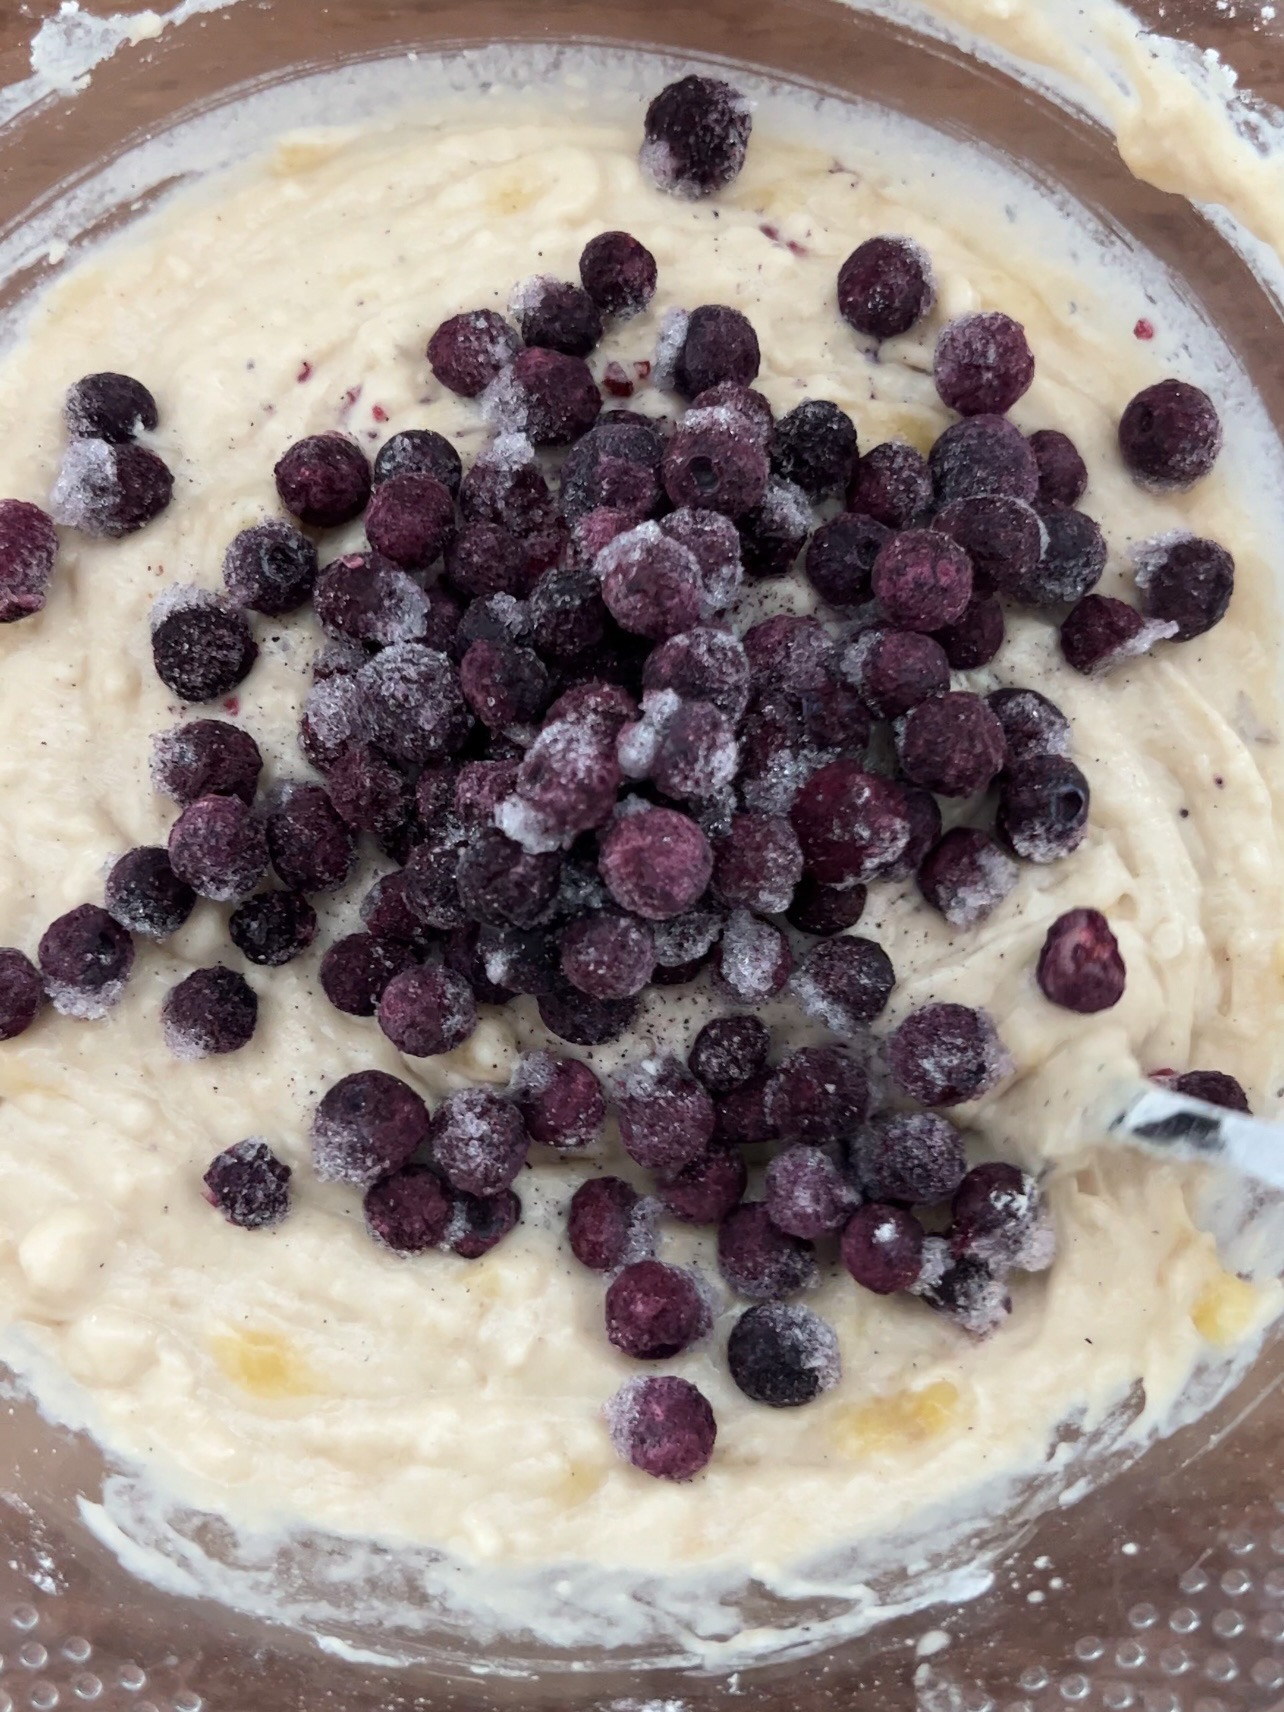 muffin batter in a clear mixing bowl with frozen blueberries being added.